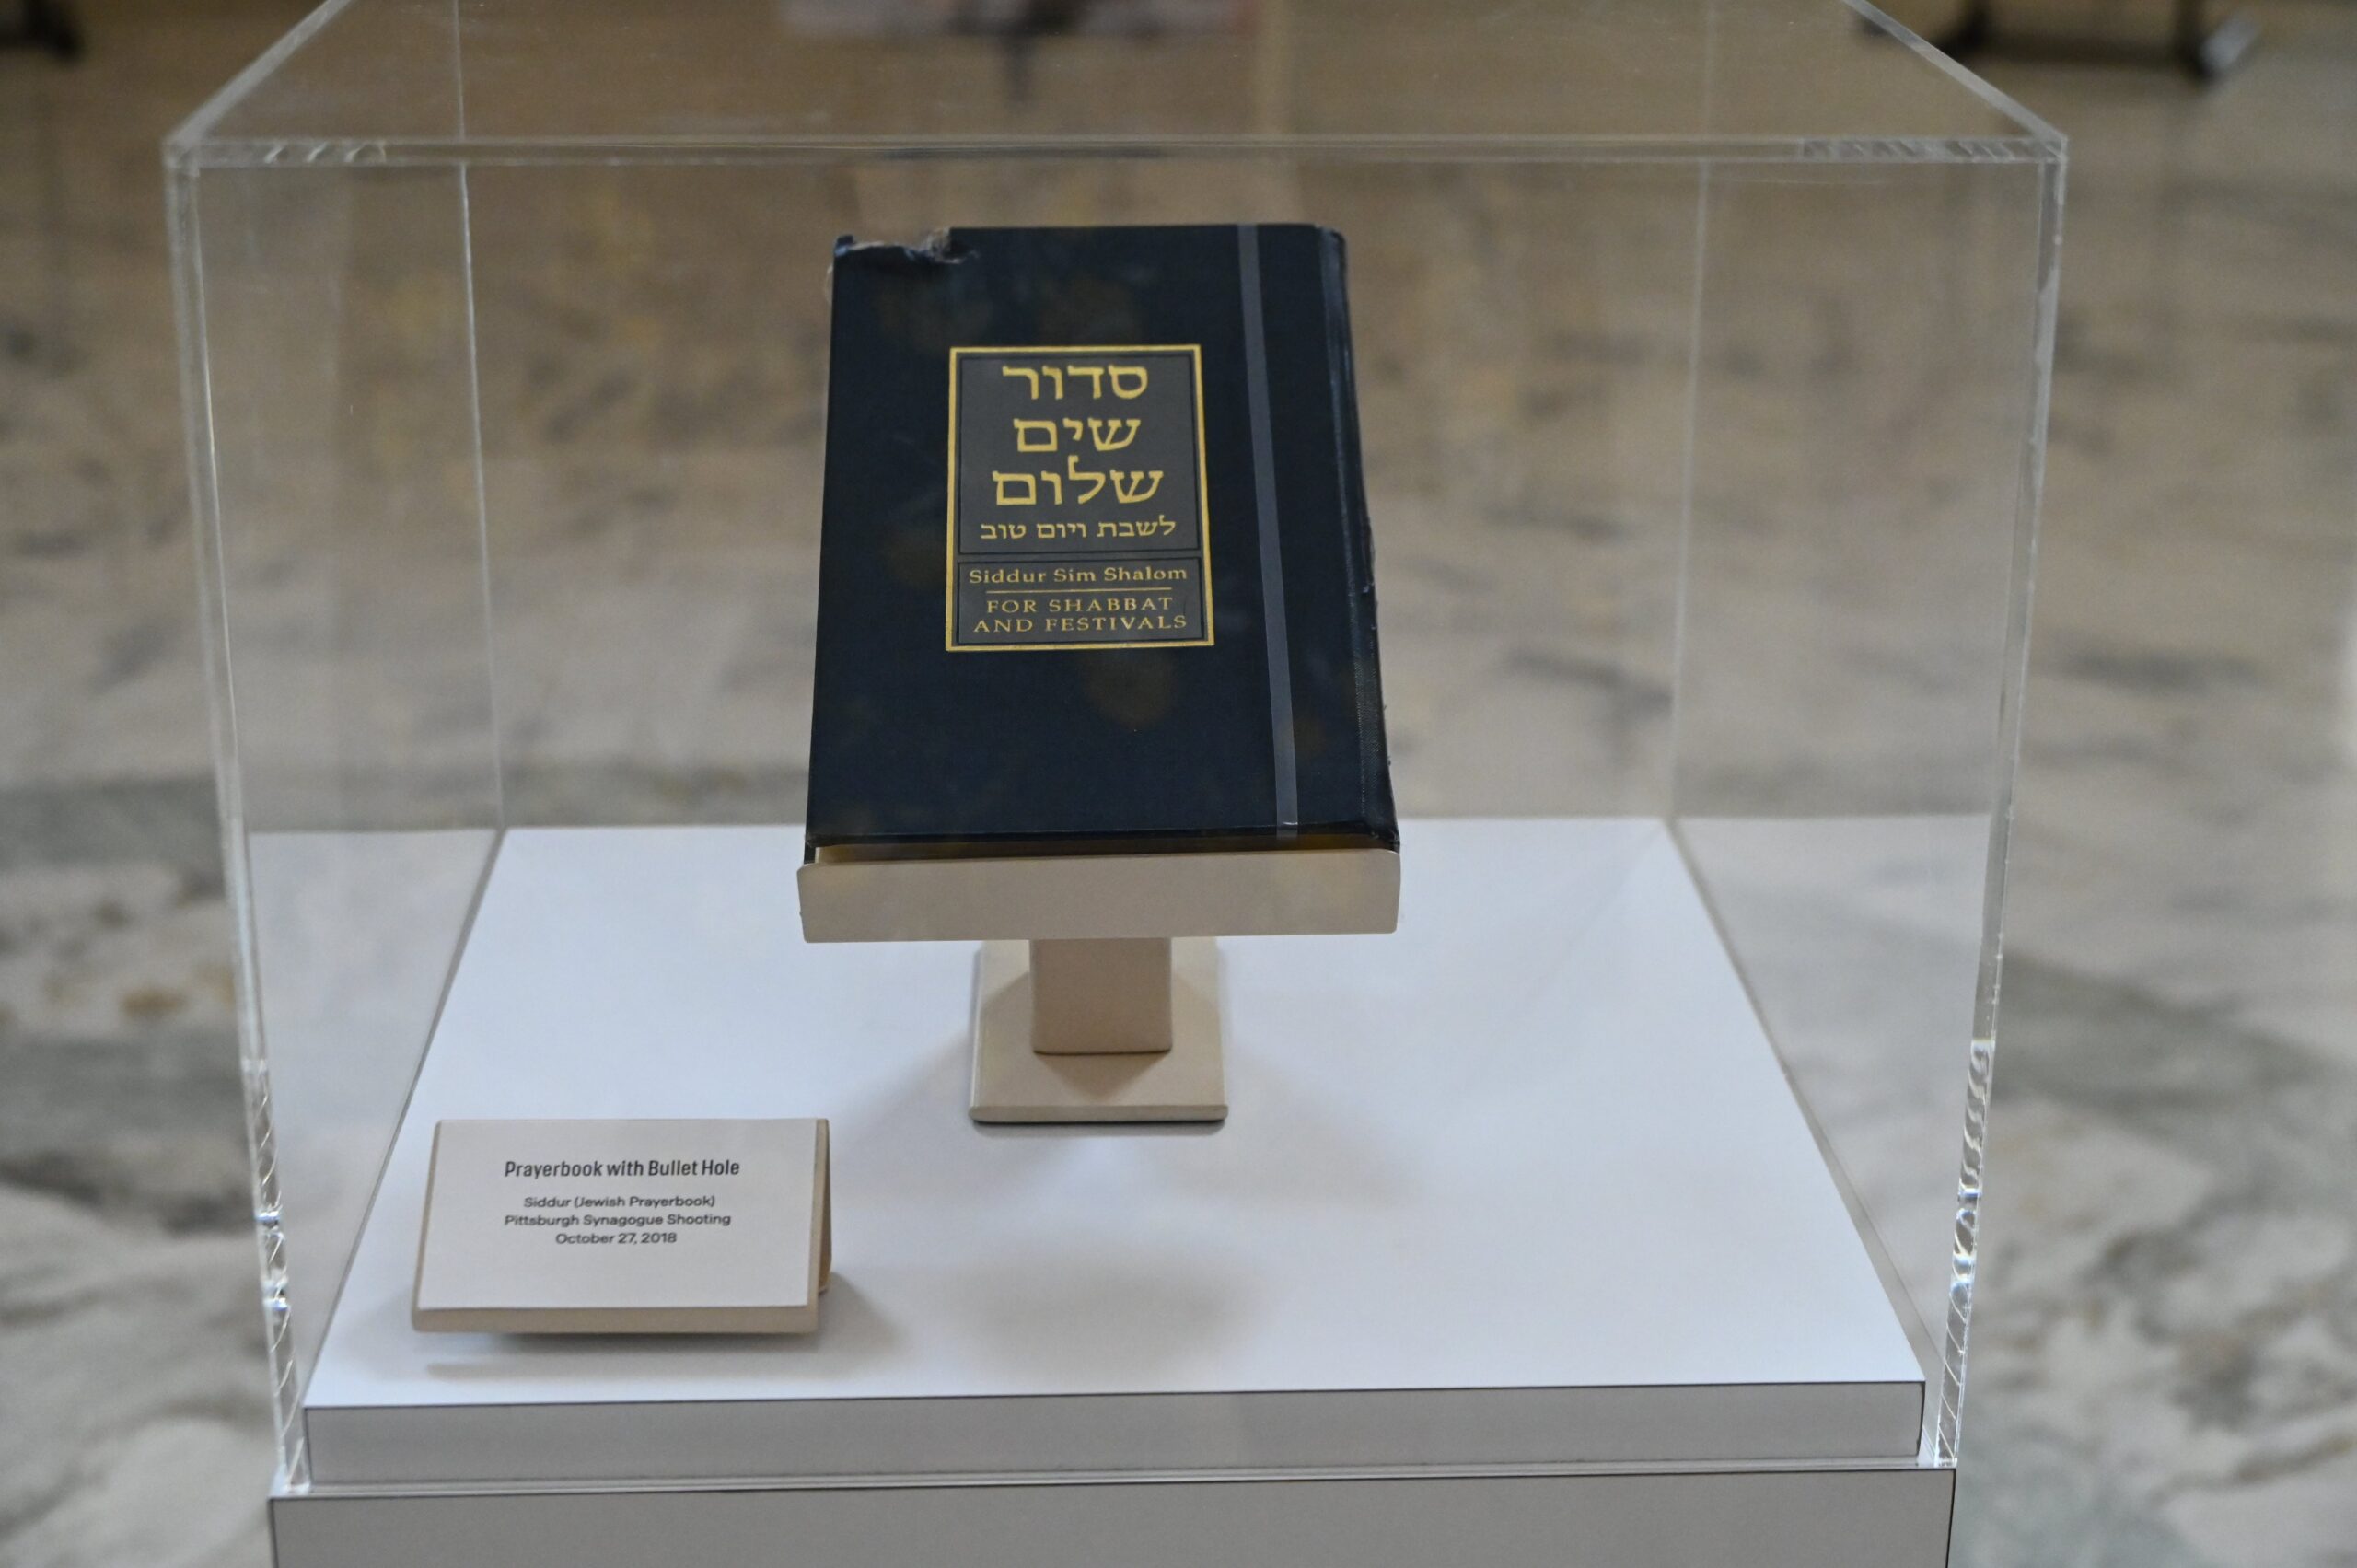 Exhibit on the Deadly Tree of Life Synagogue Shooting Featured at US Capitol